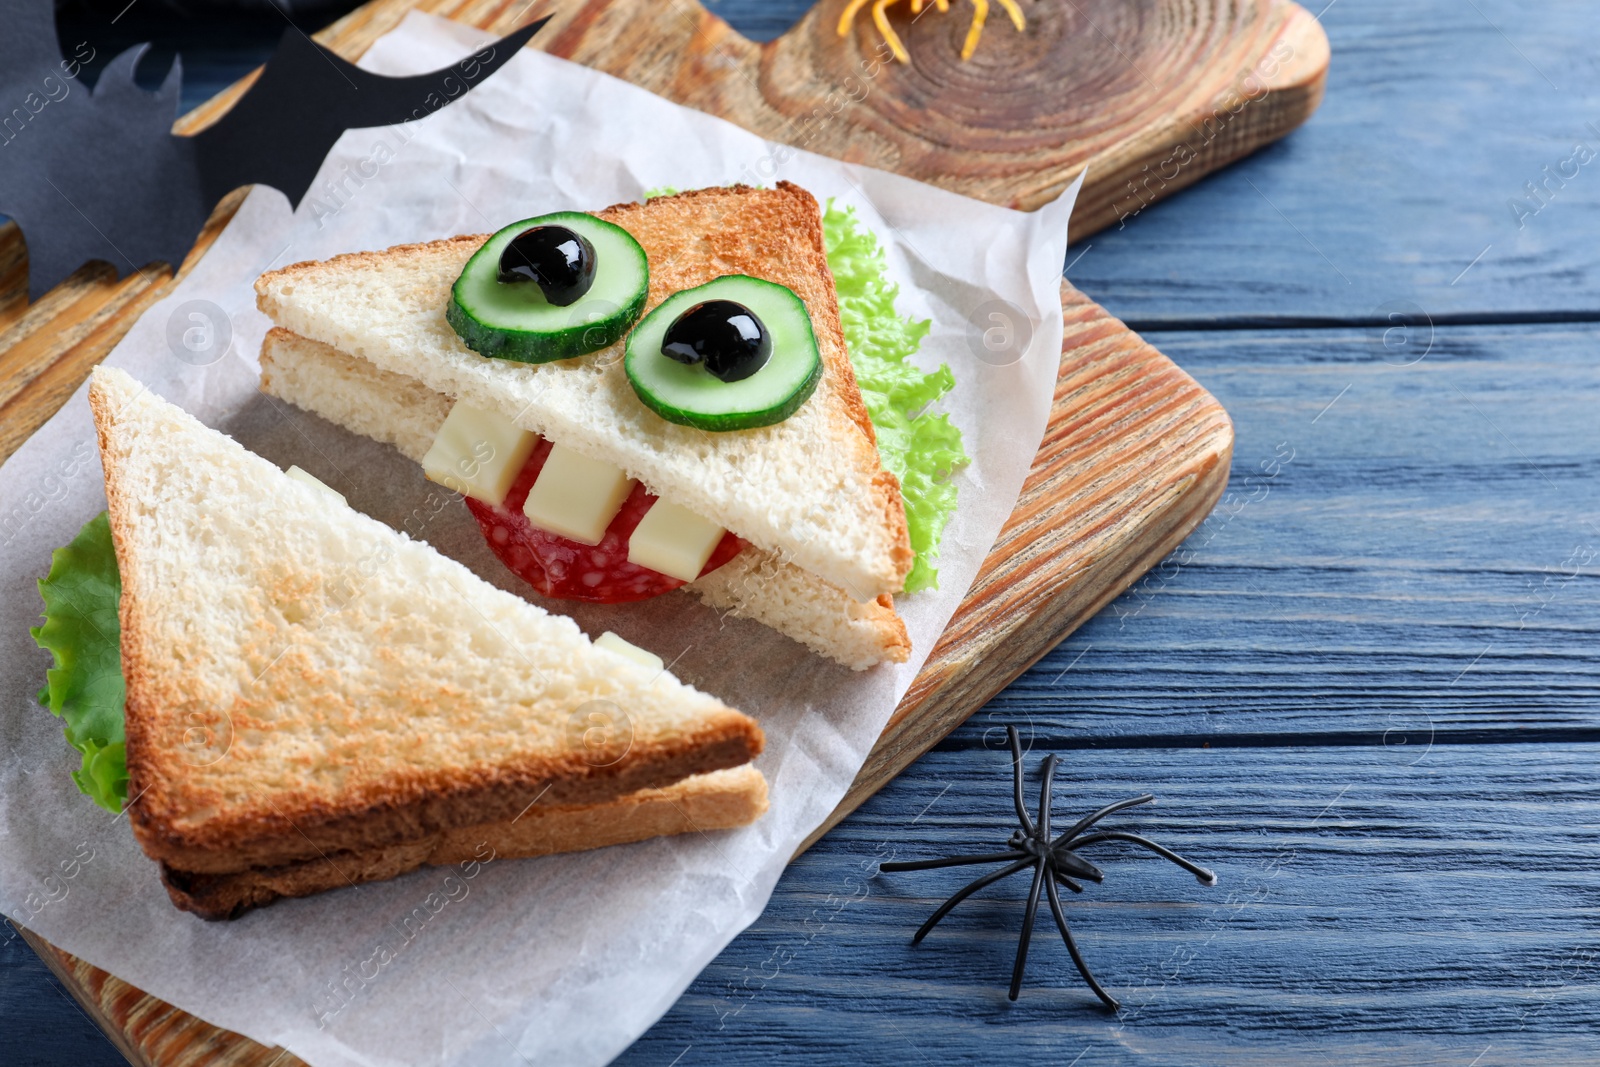 Photo of Cute monster sandwich served on blue wooden table, closeup. Halloween party food